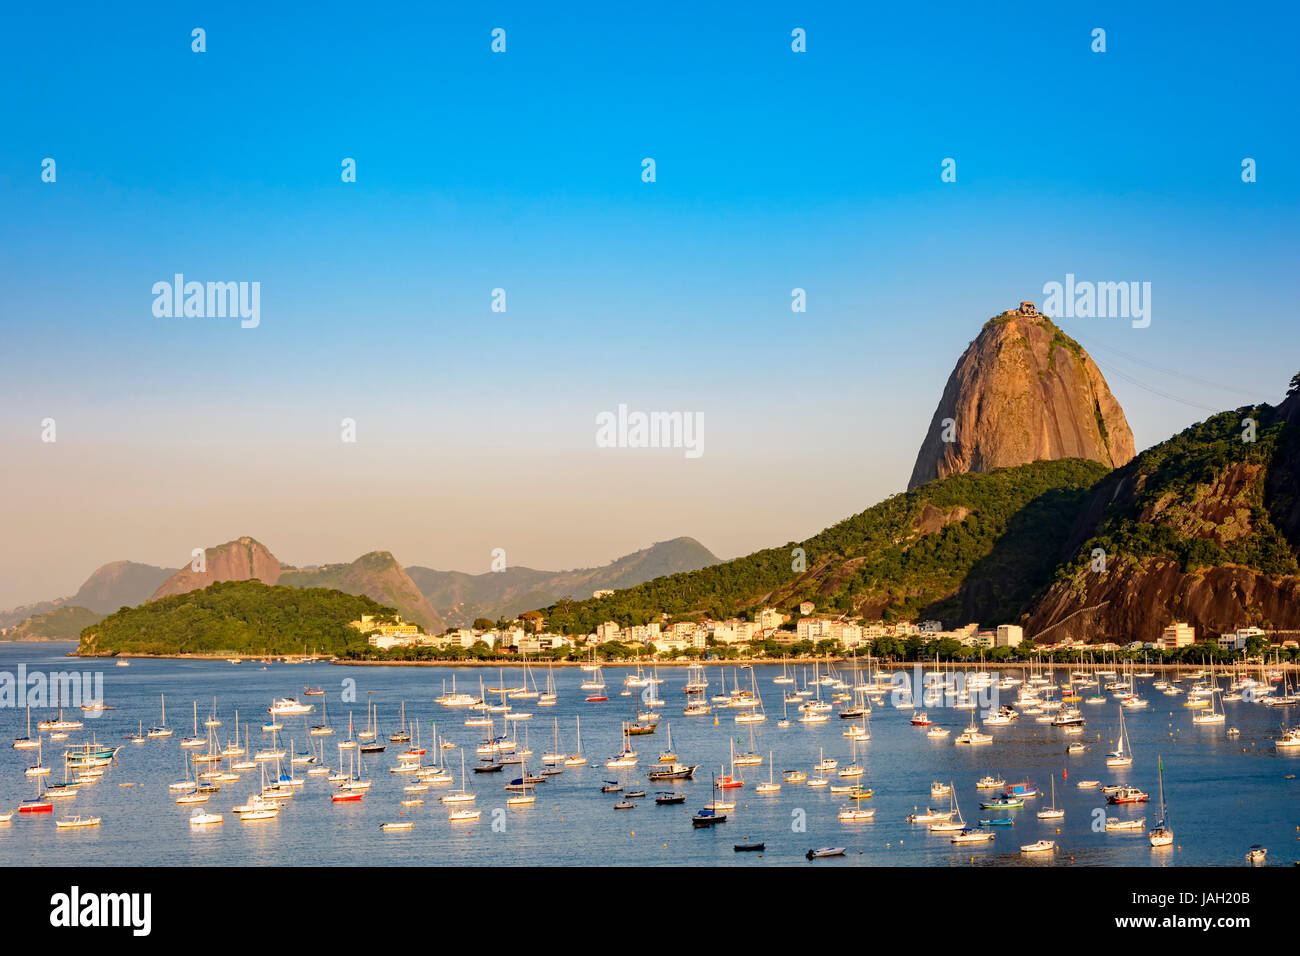 Botafogo Bay with their boats and the Sugar Loaf hill in Rio de Janeiro Stock Photo